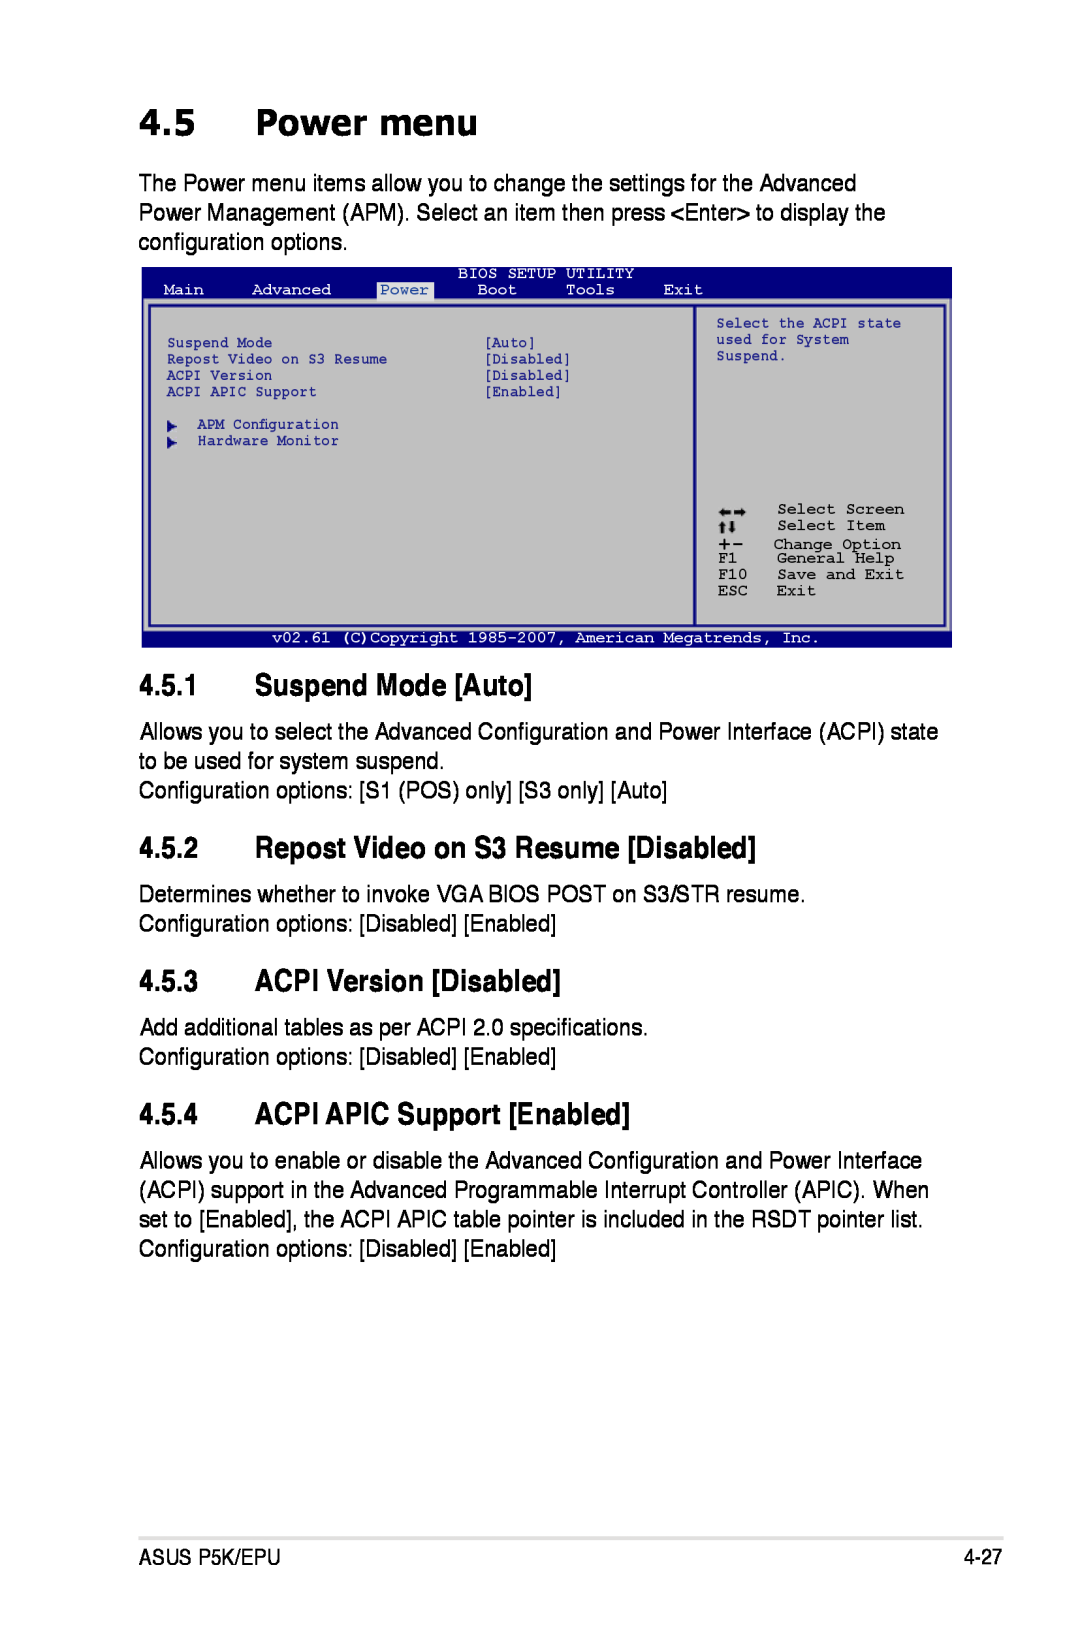 Asus P5K/EPU manual Power menu, Suspend Mode Auto, Repost Video on S3 Resume Disabled, ACPI Version Disabled 